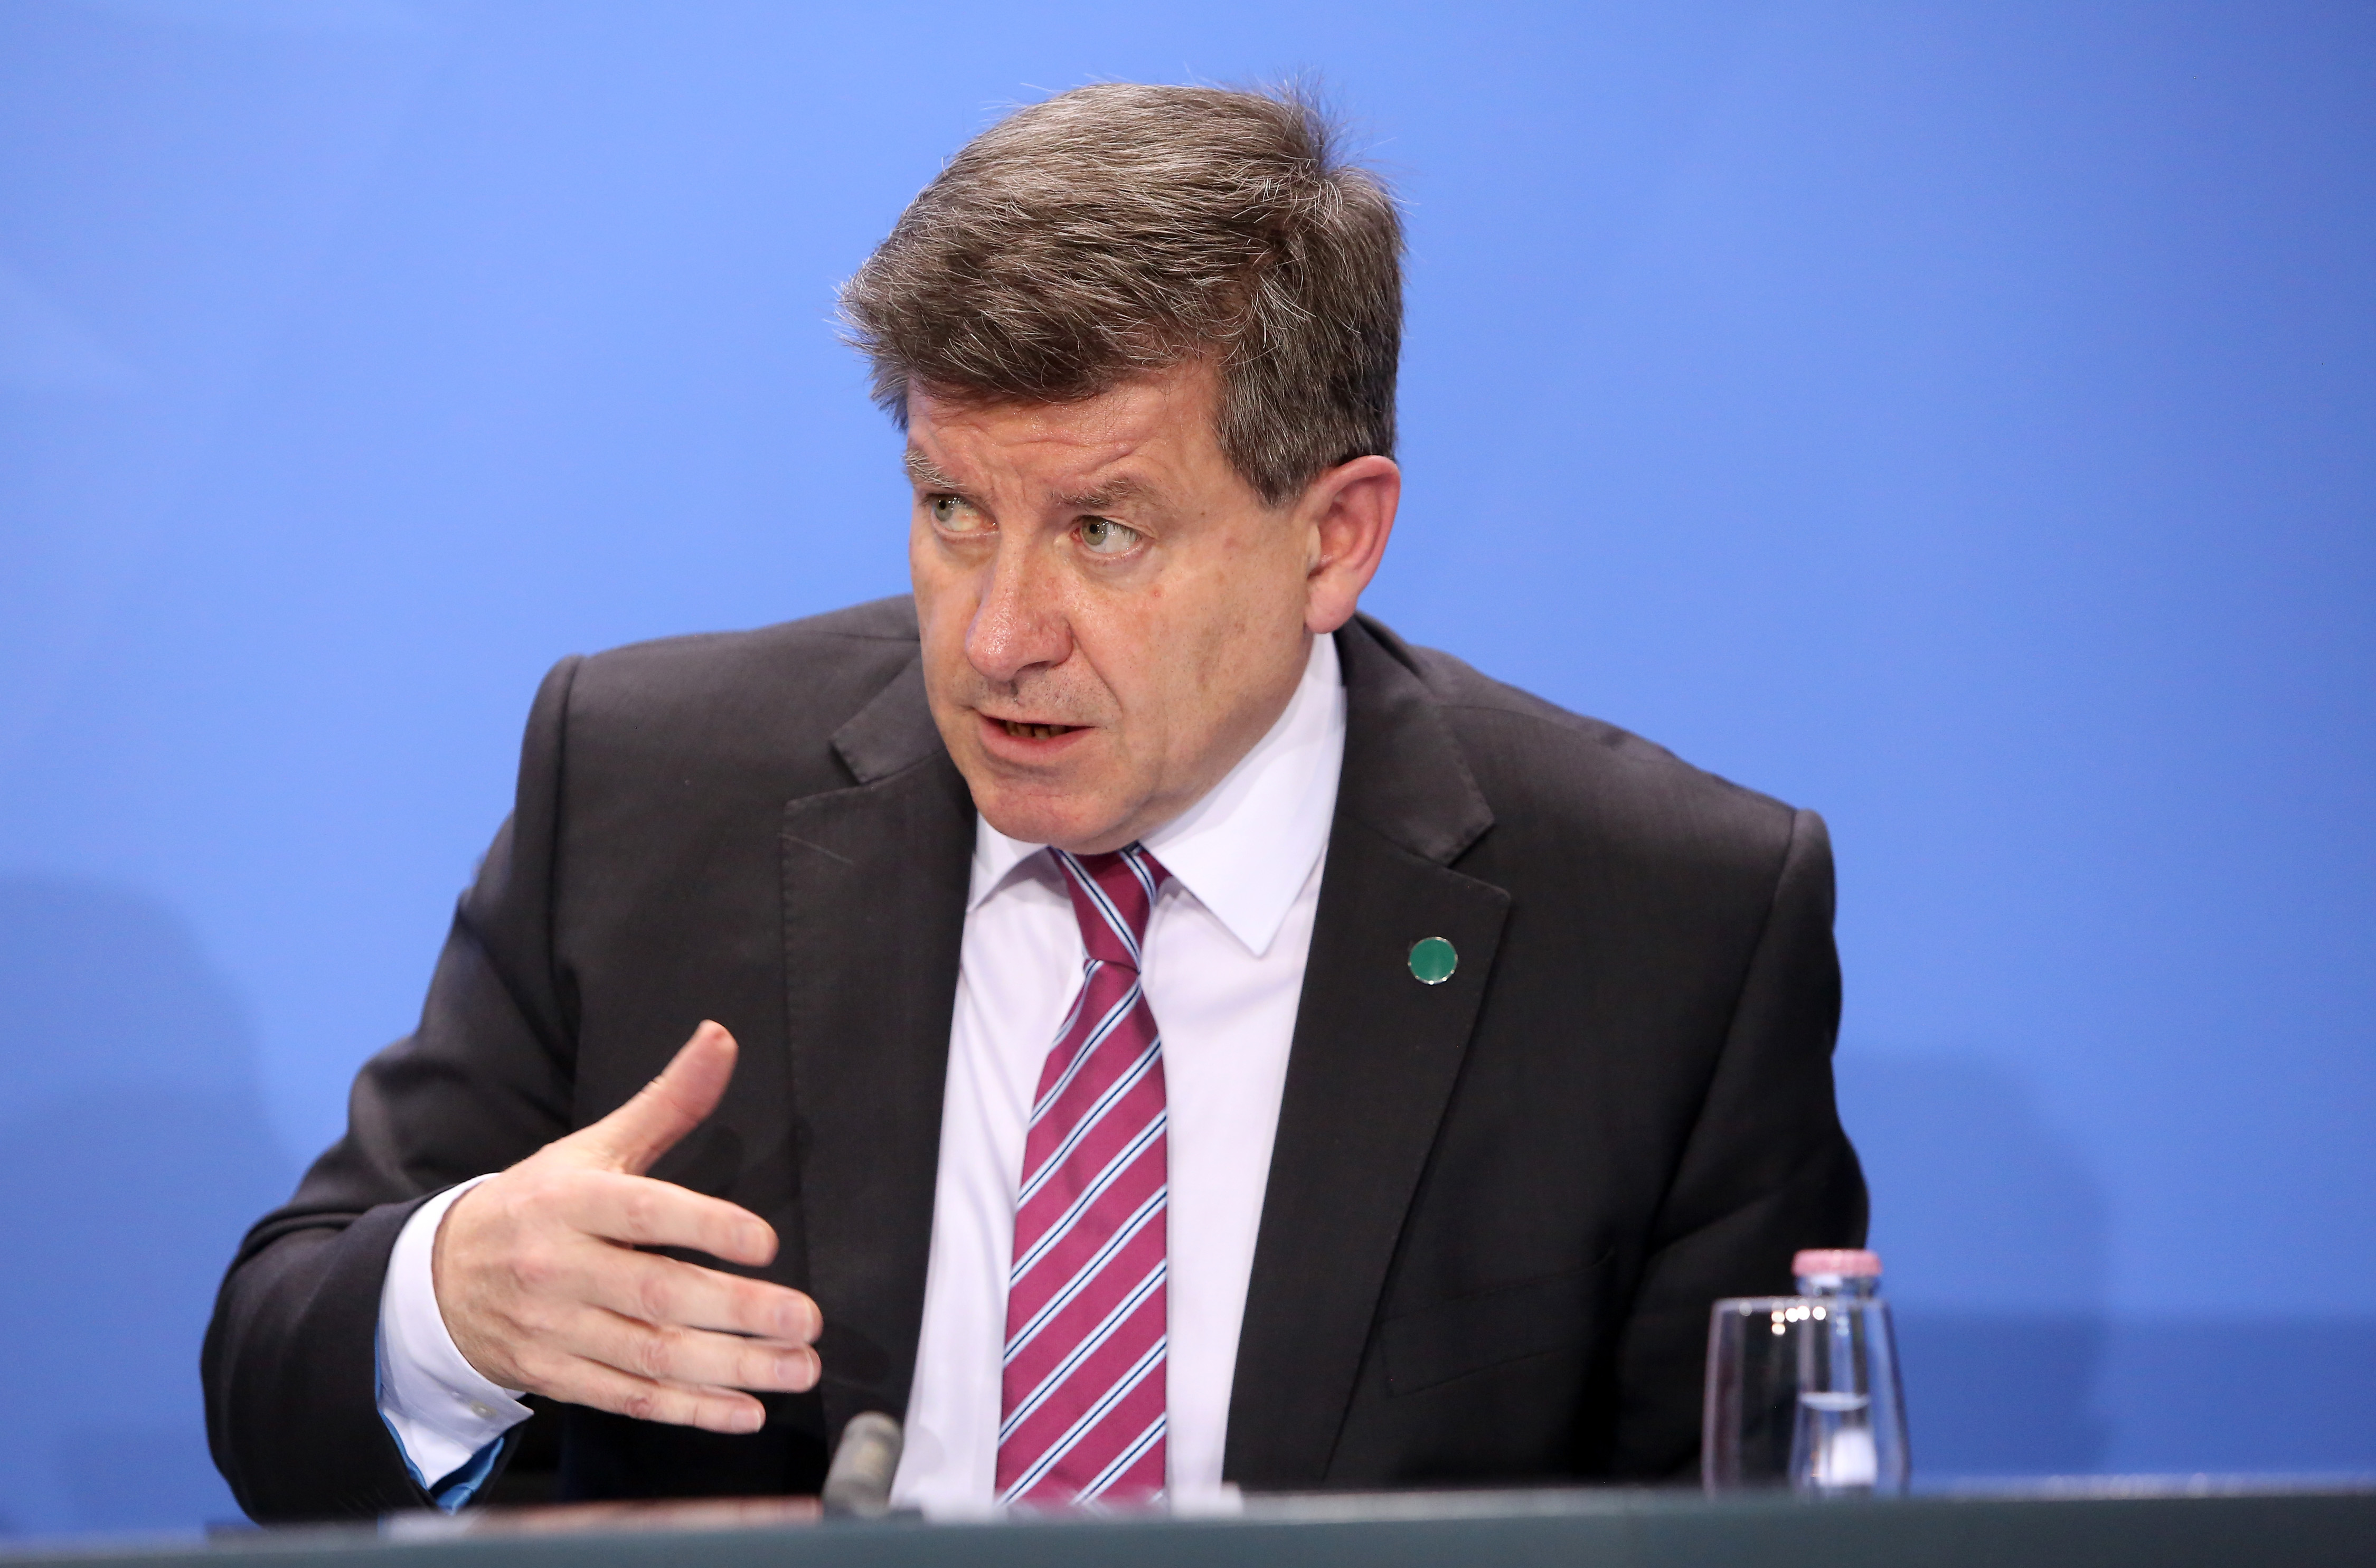 Guy Ryder, general secretary of the World Labour Organisation, attends a press conference on April 5, 2016 in Berlin, Germany.  Ryder spoke about the changing structure of work at the Fortune TIME Global Forum on Dec. 2. (Adam Berry—Getty Images)